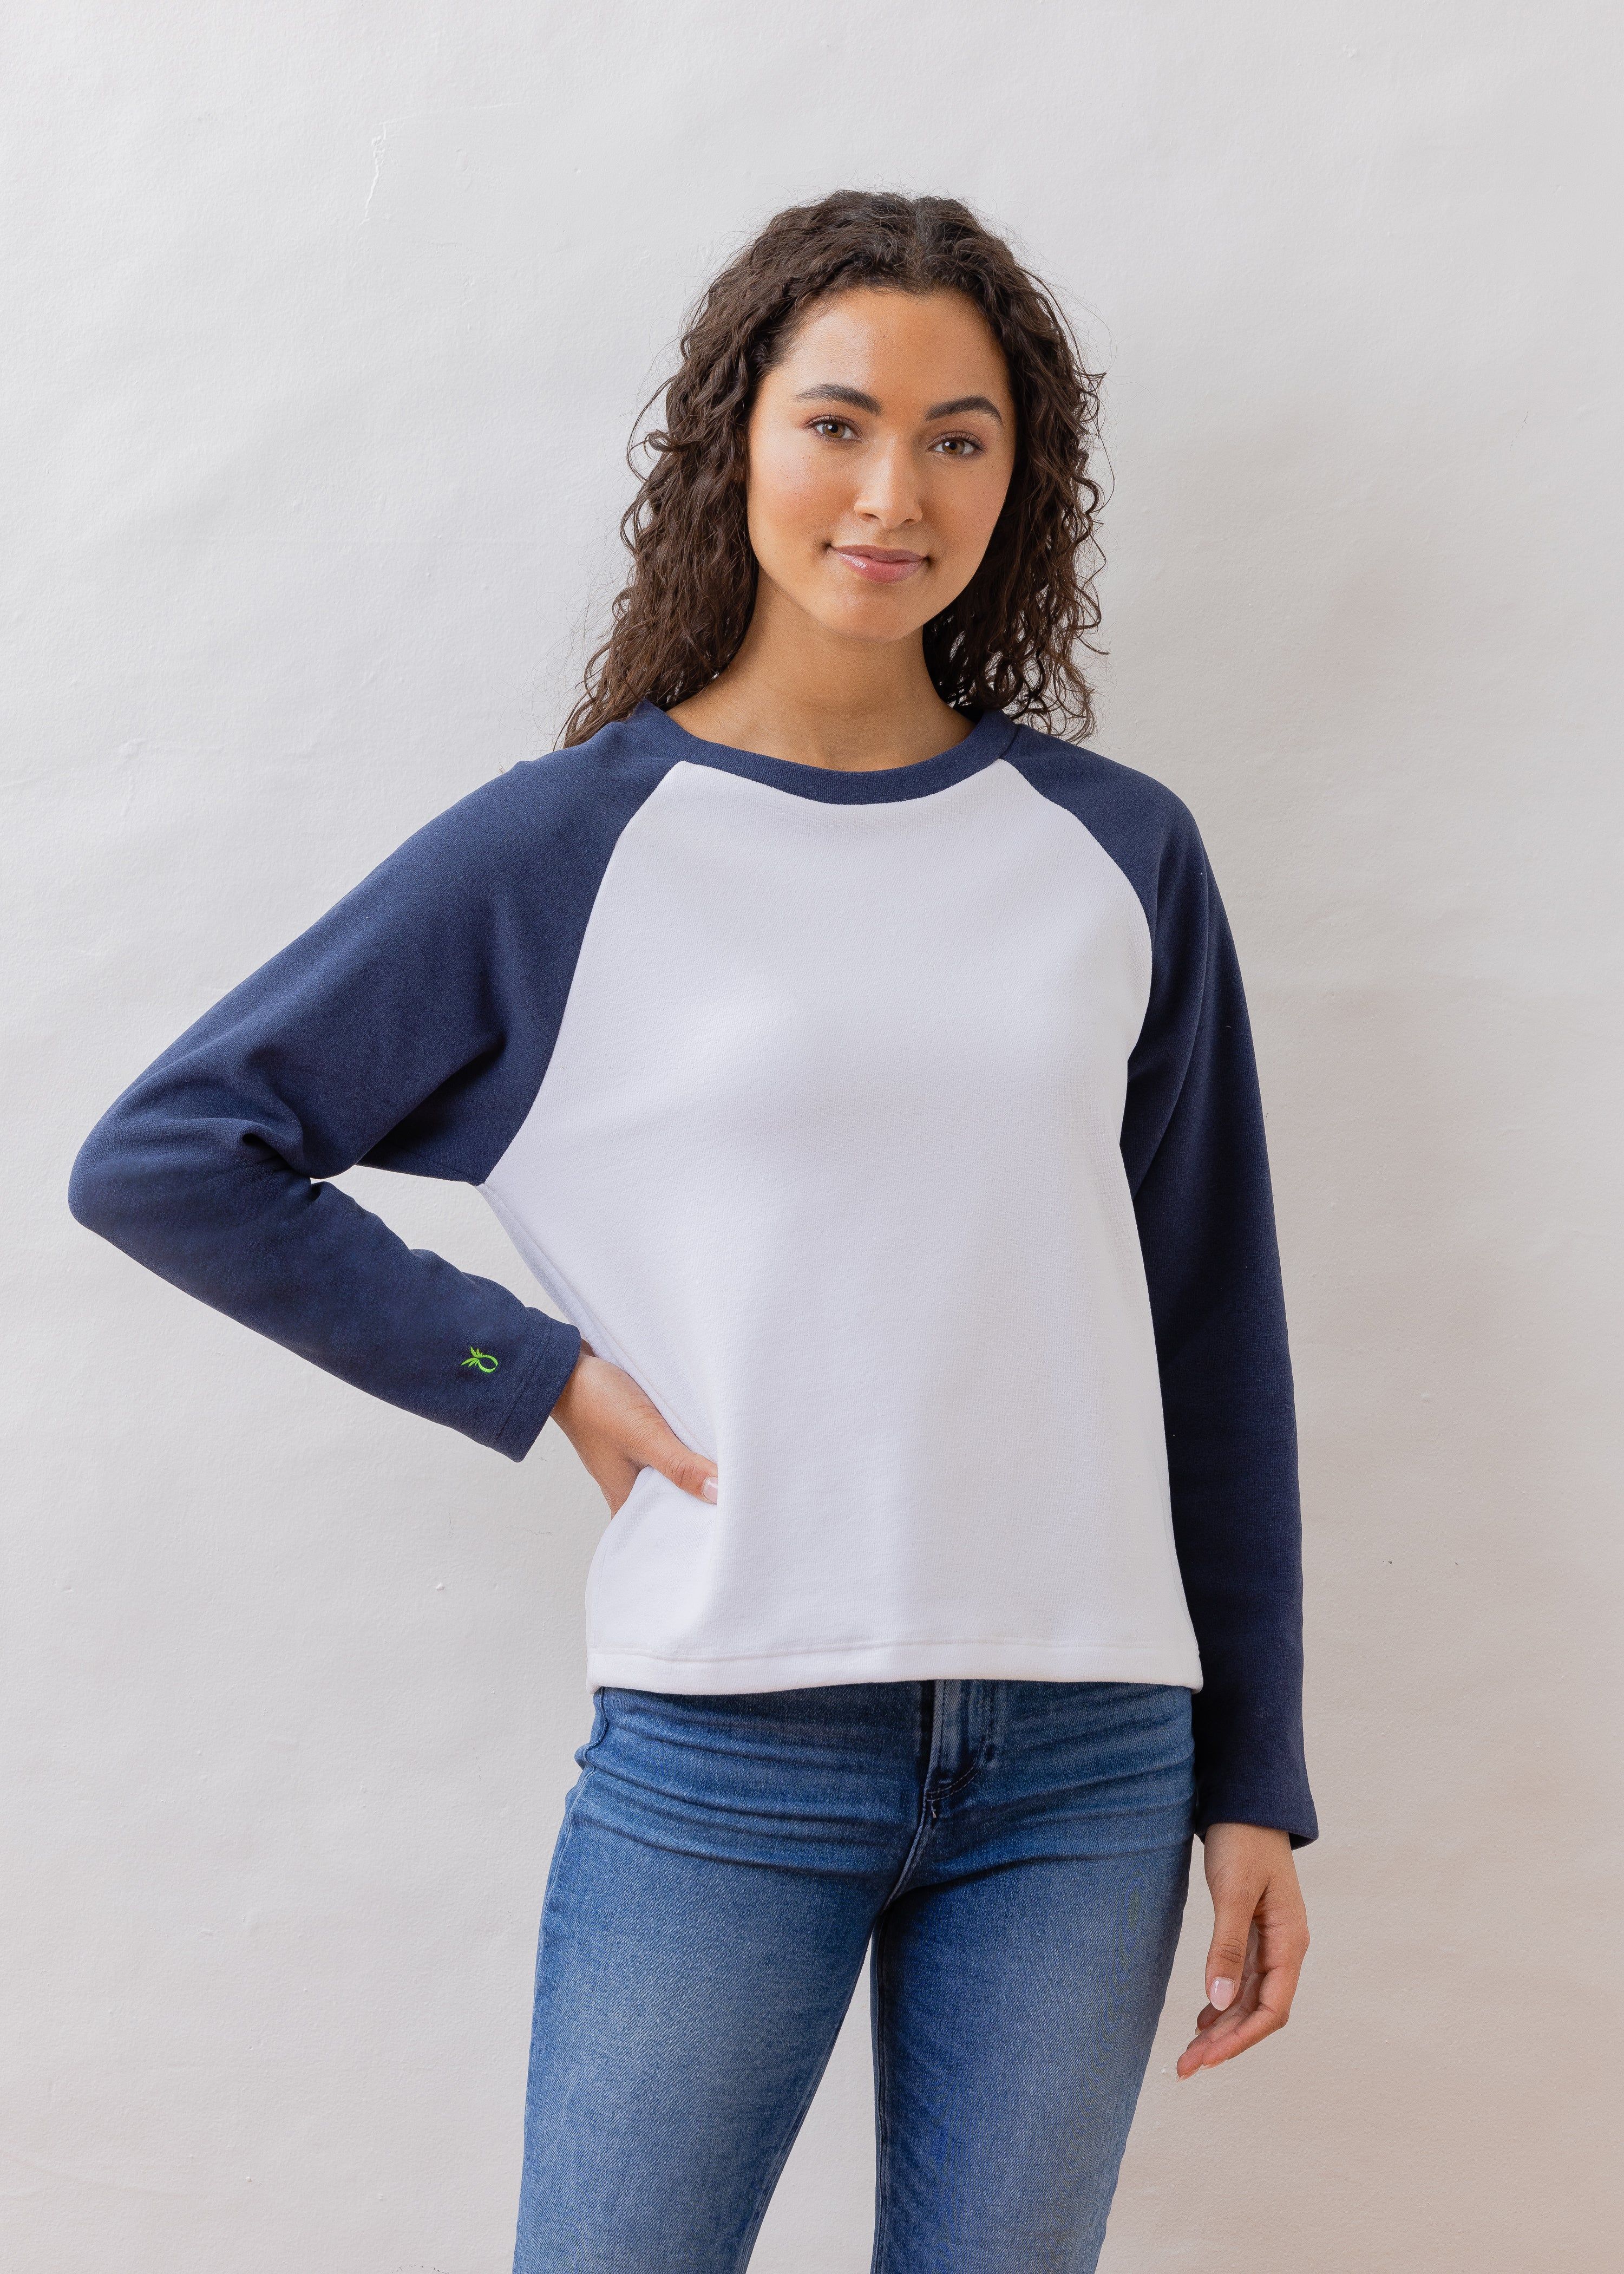 Cove Colorblock Crewneck in Terry Fleece (White / Navy) | Dudley Stephens